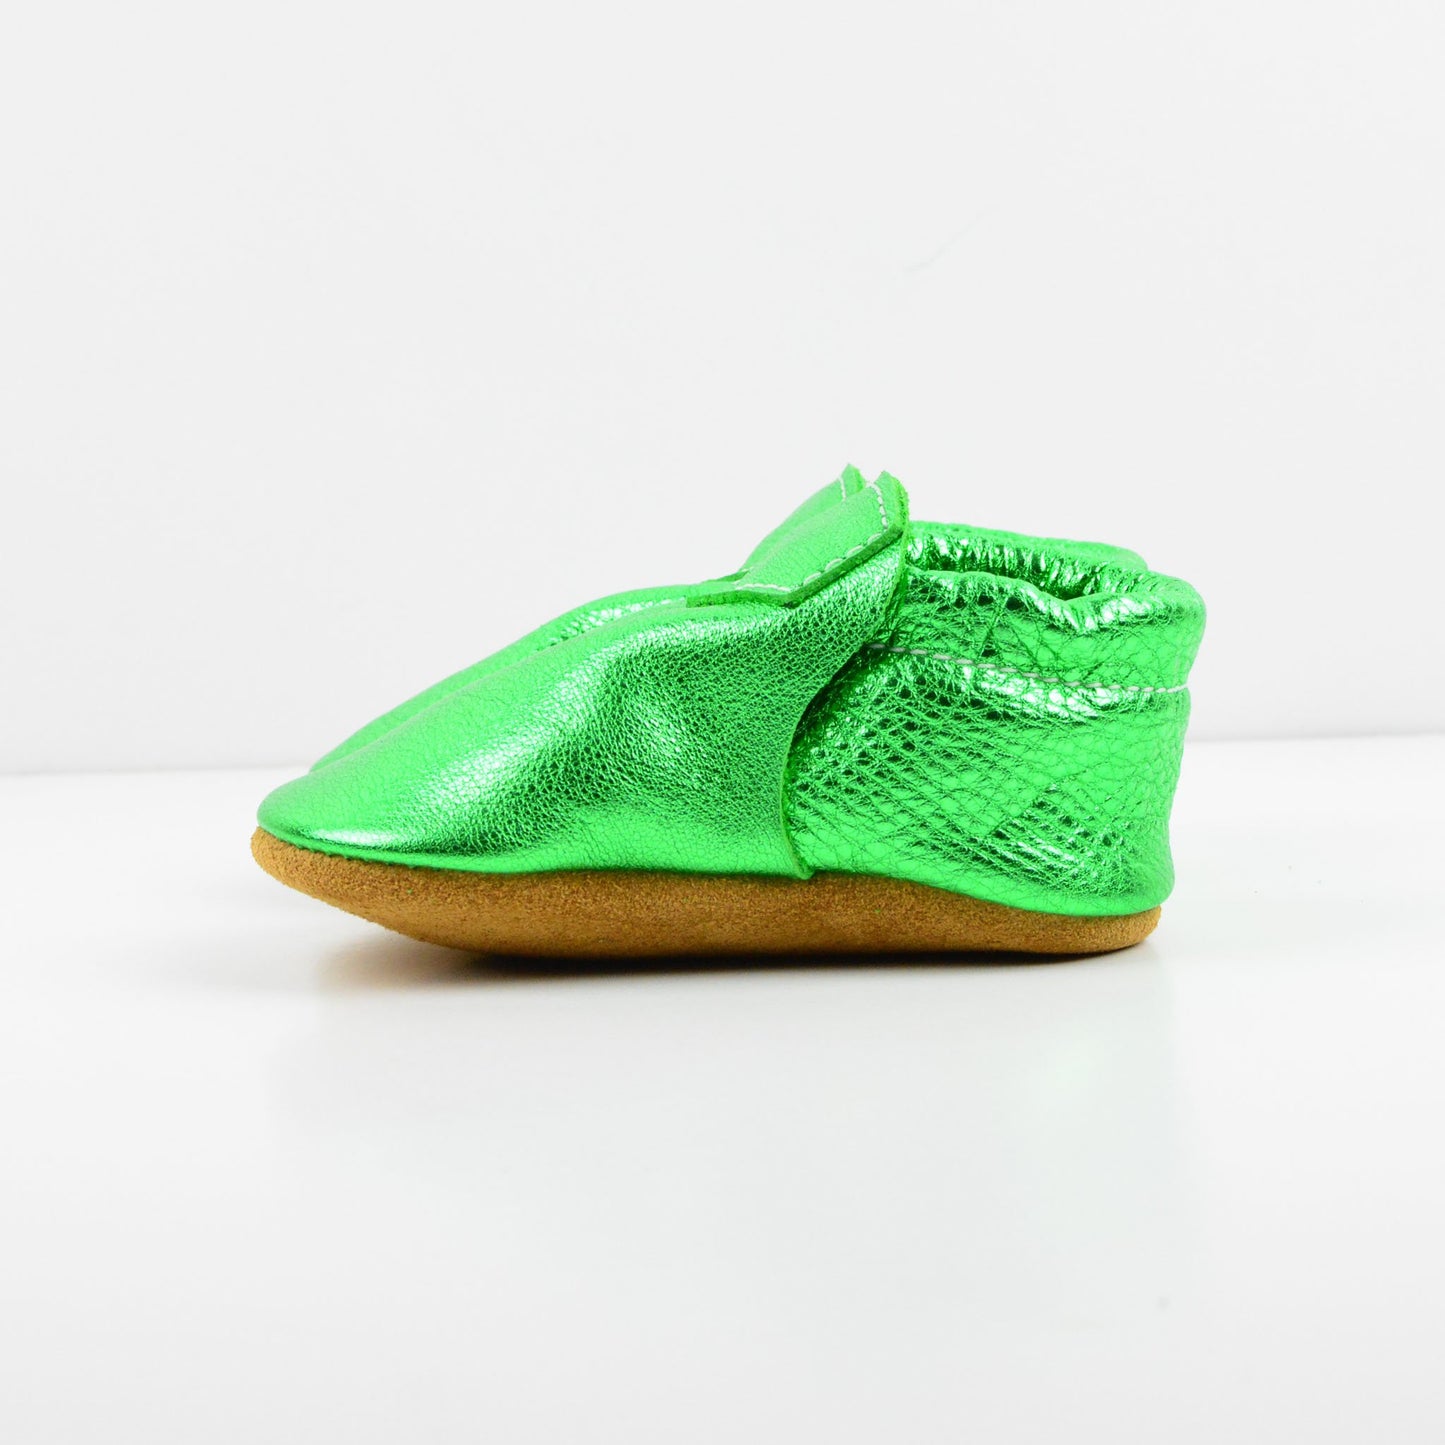 RTS Christmas Green Lokicks With Tan Suede Leather Soles - Size 3 (12-18M)(5")